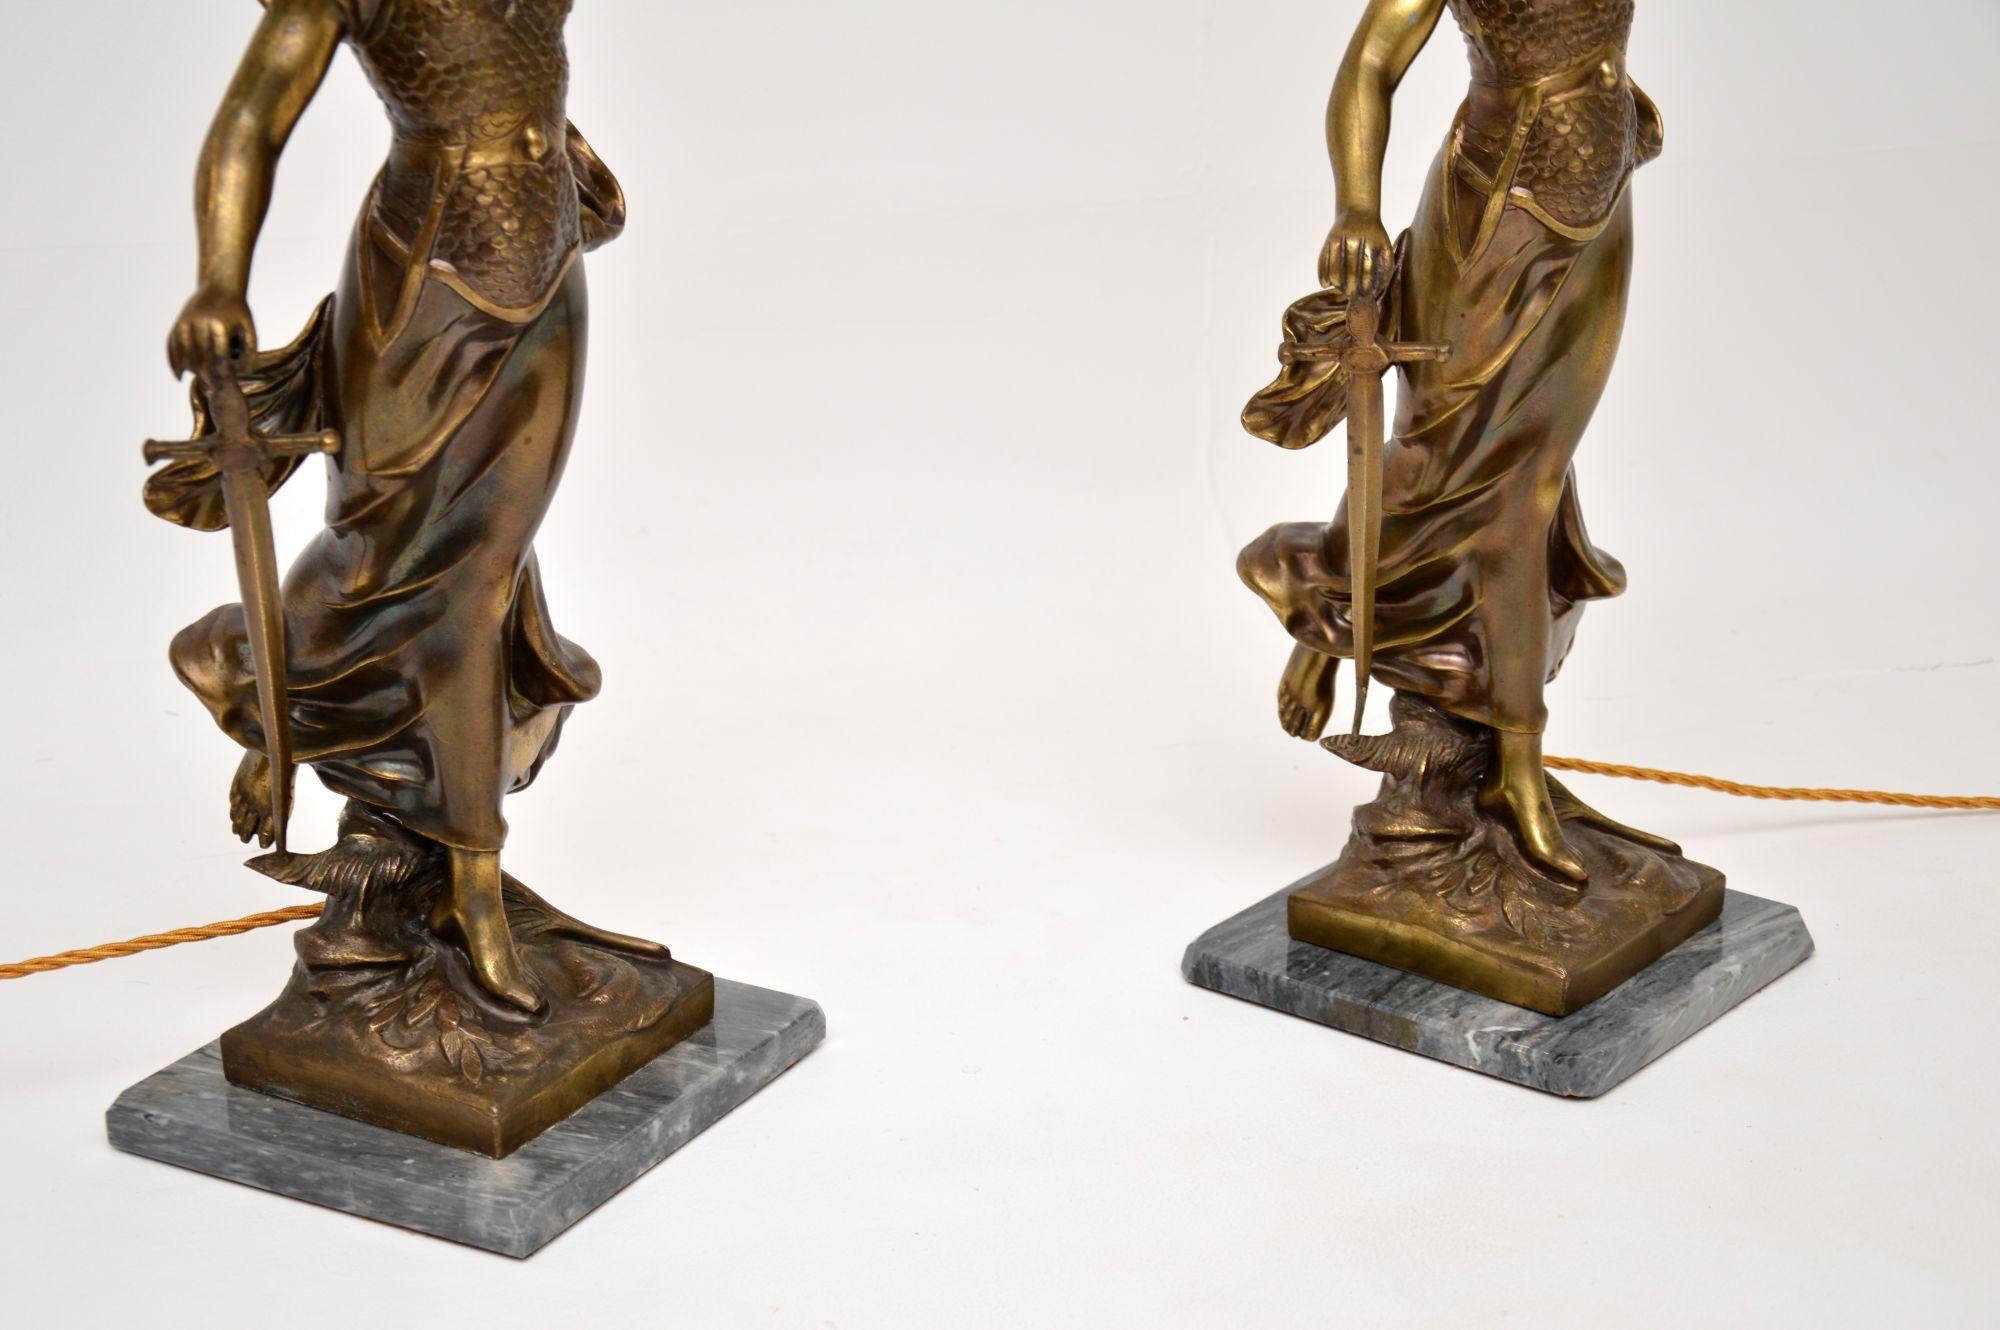 Pair of Large Antique Brass & Marble Table Lamps Depicting Greek Goddess Athena 1